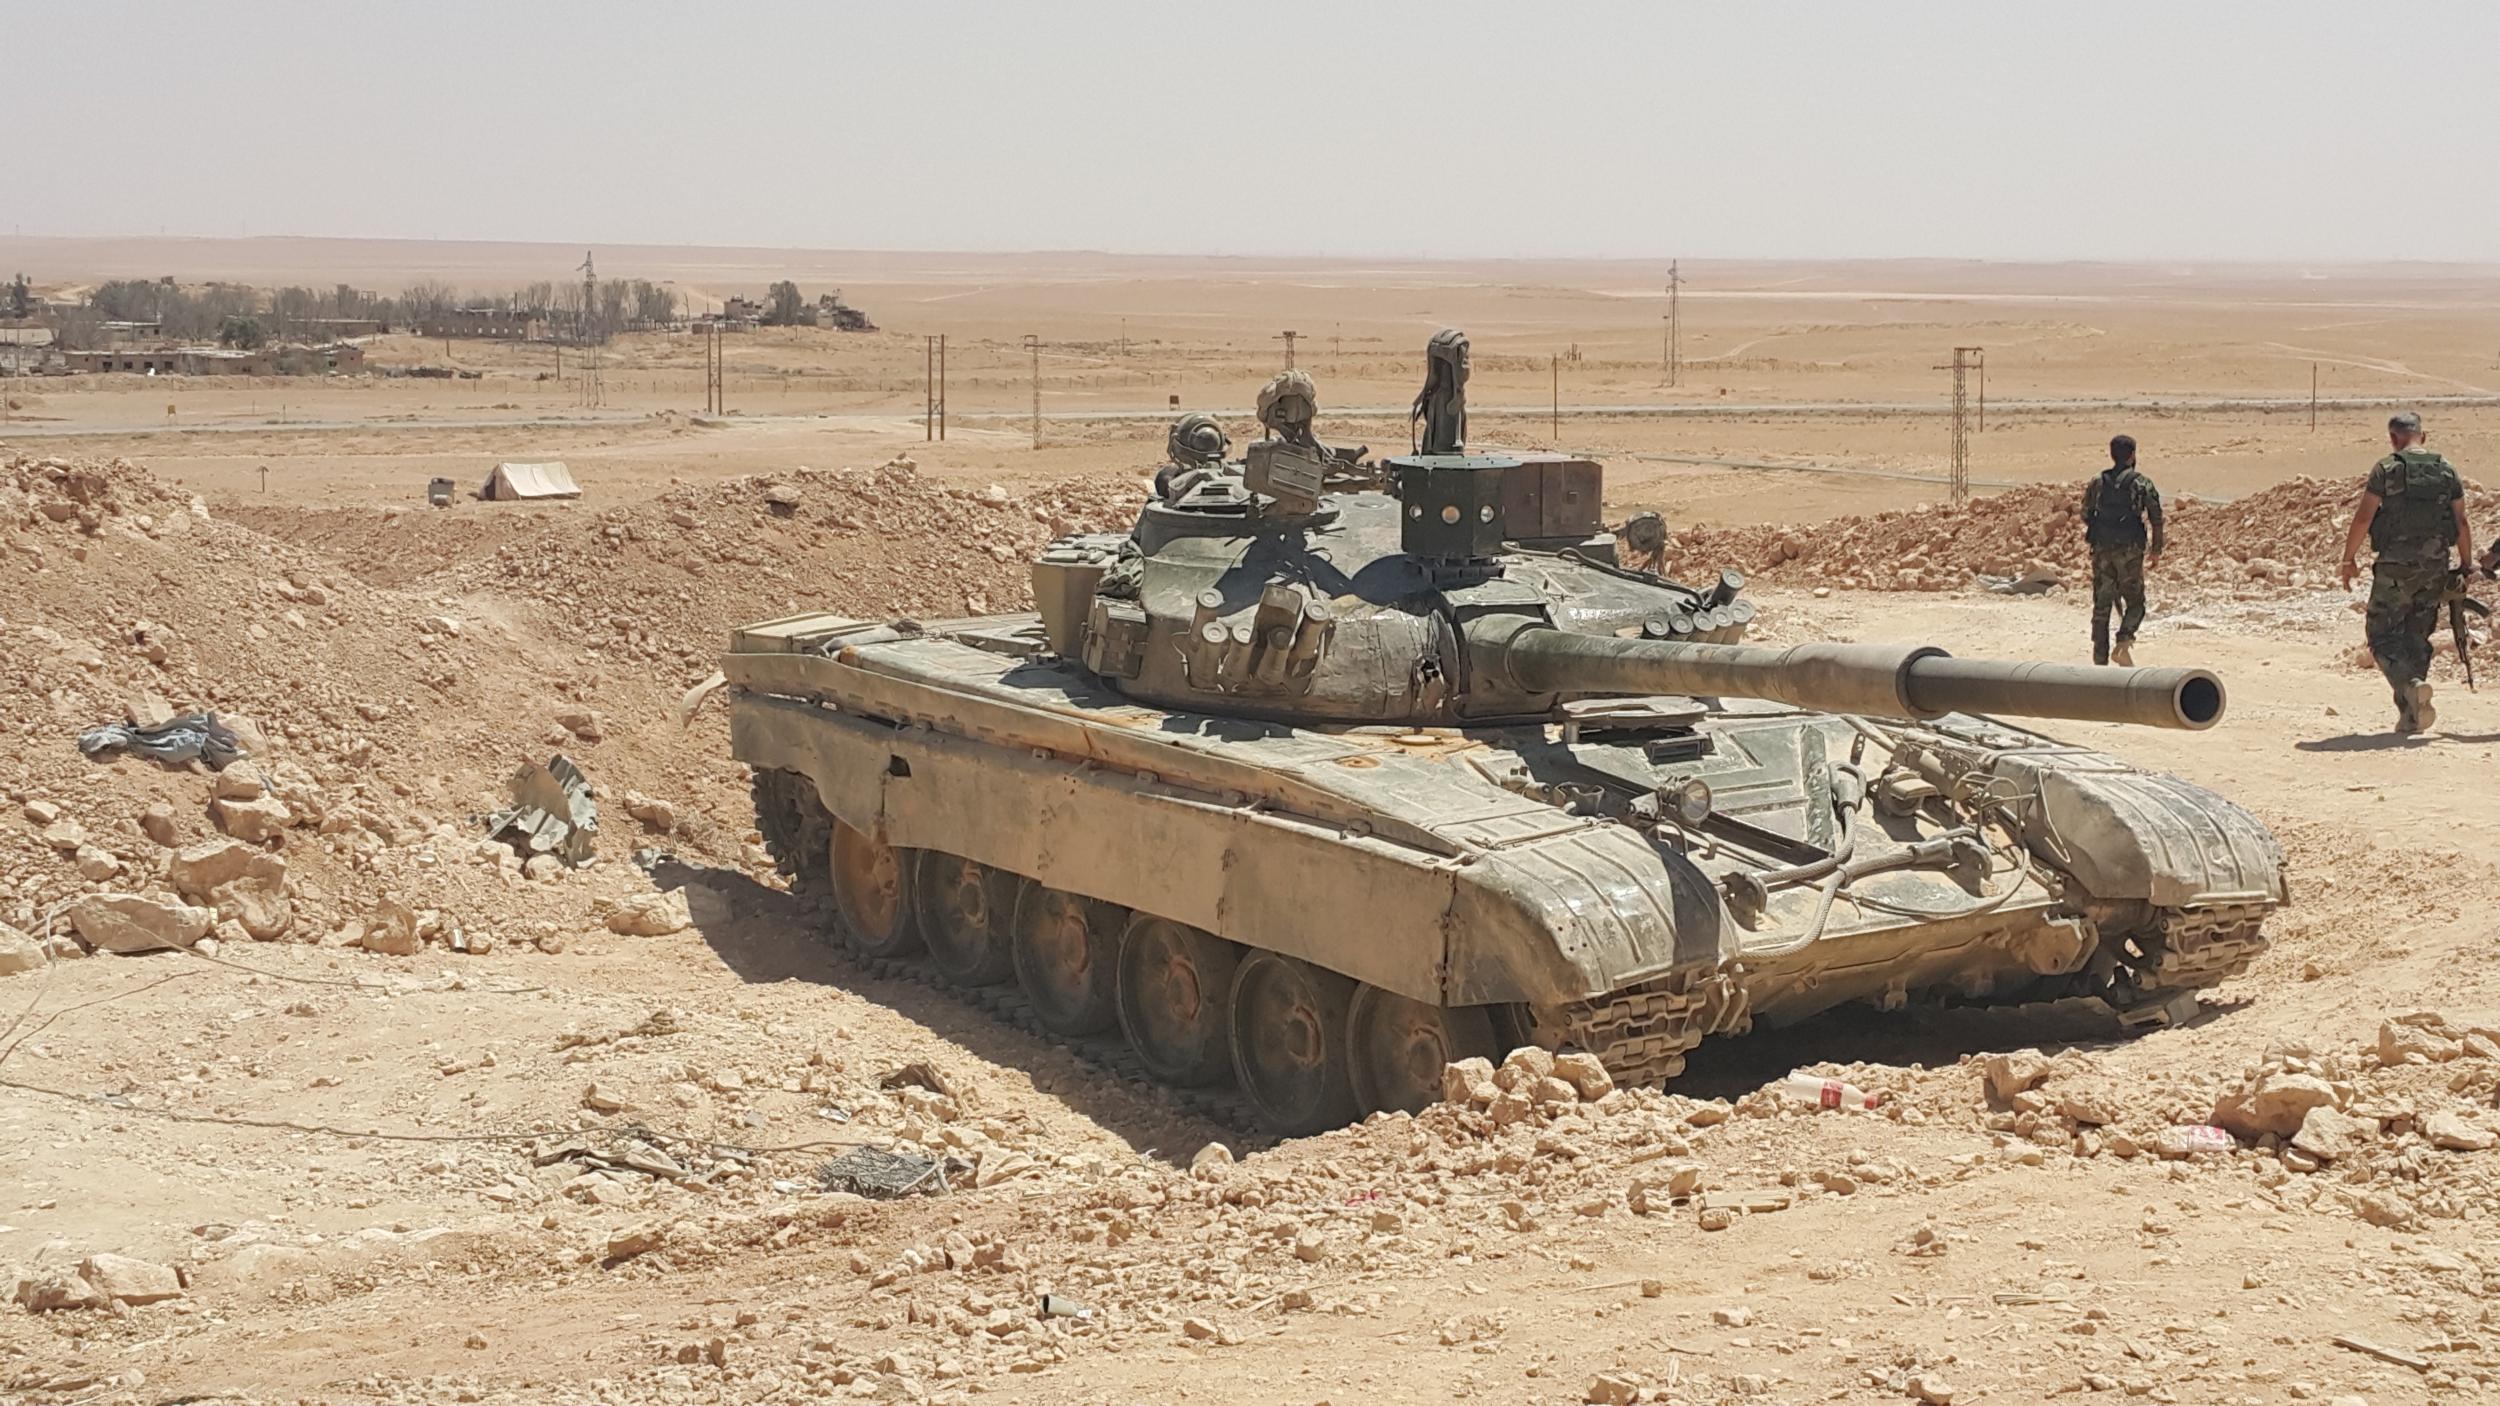 Pointing to Deir ez-Zour: the desert front line in the east of the country